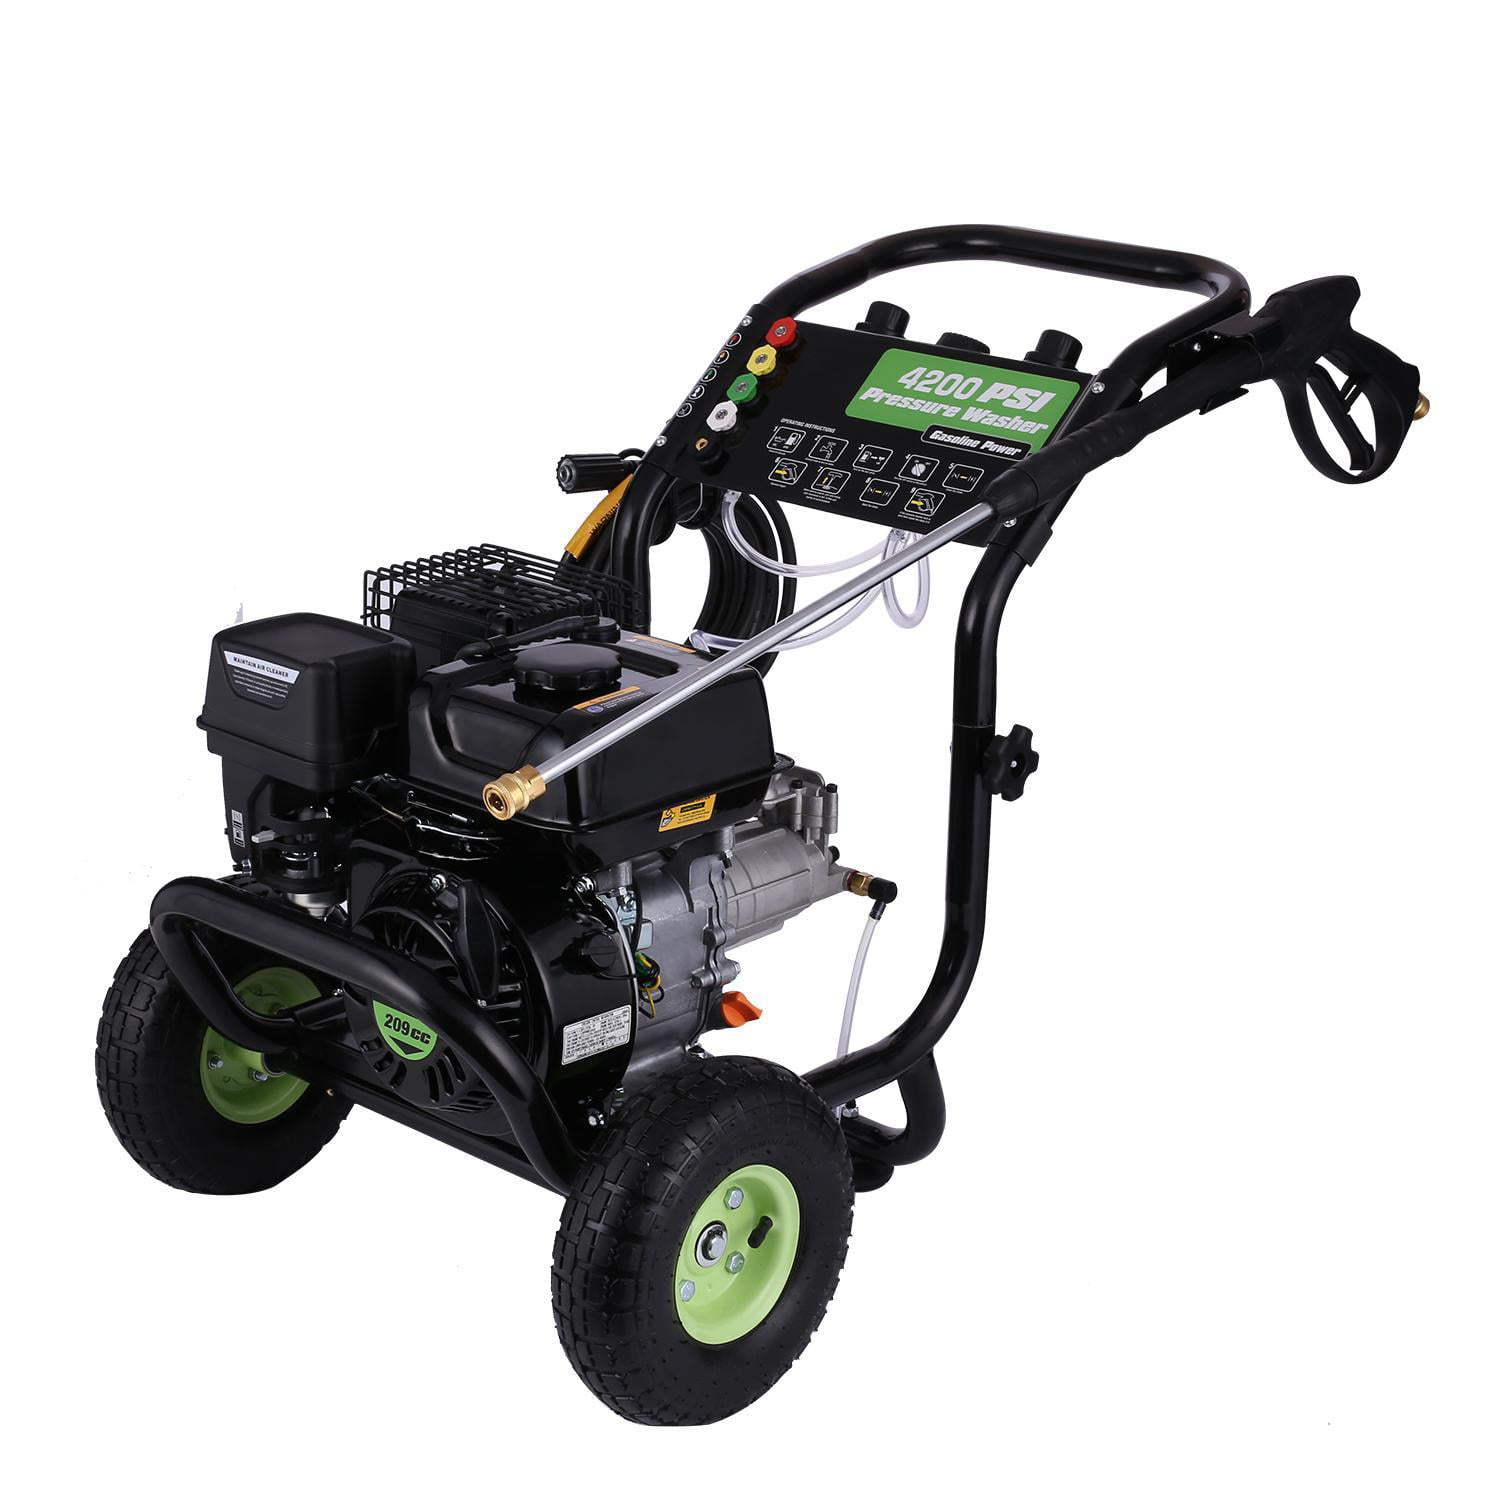 Details about  / 3800PSI 3.0GPM Electric Pressure Washer Powerful Cold Water Cleaner Sprayer Pro^